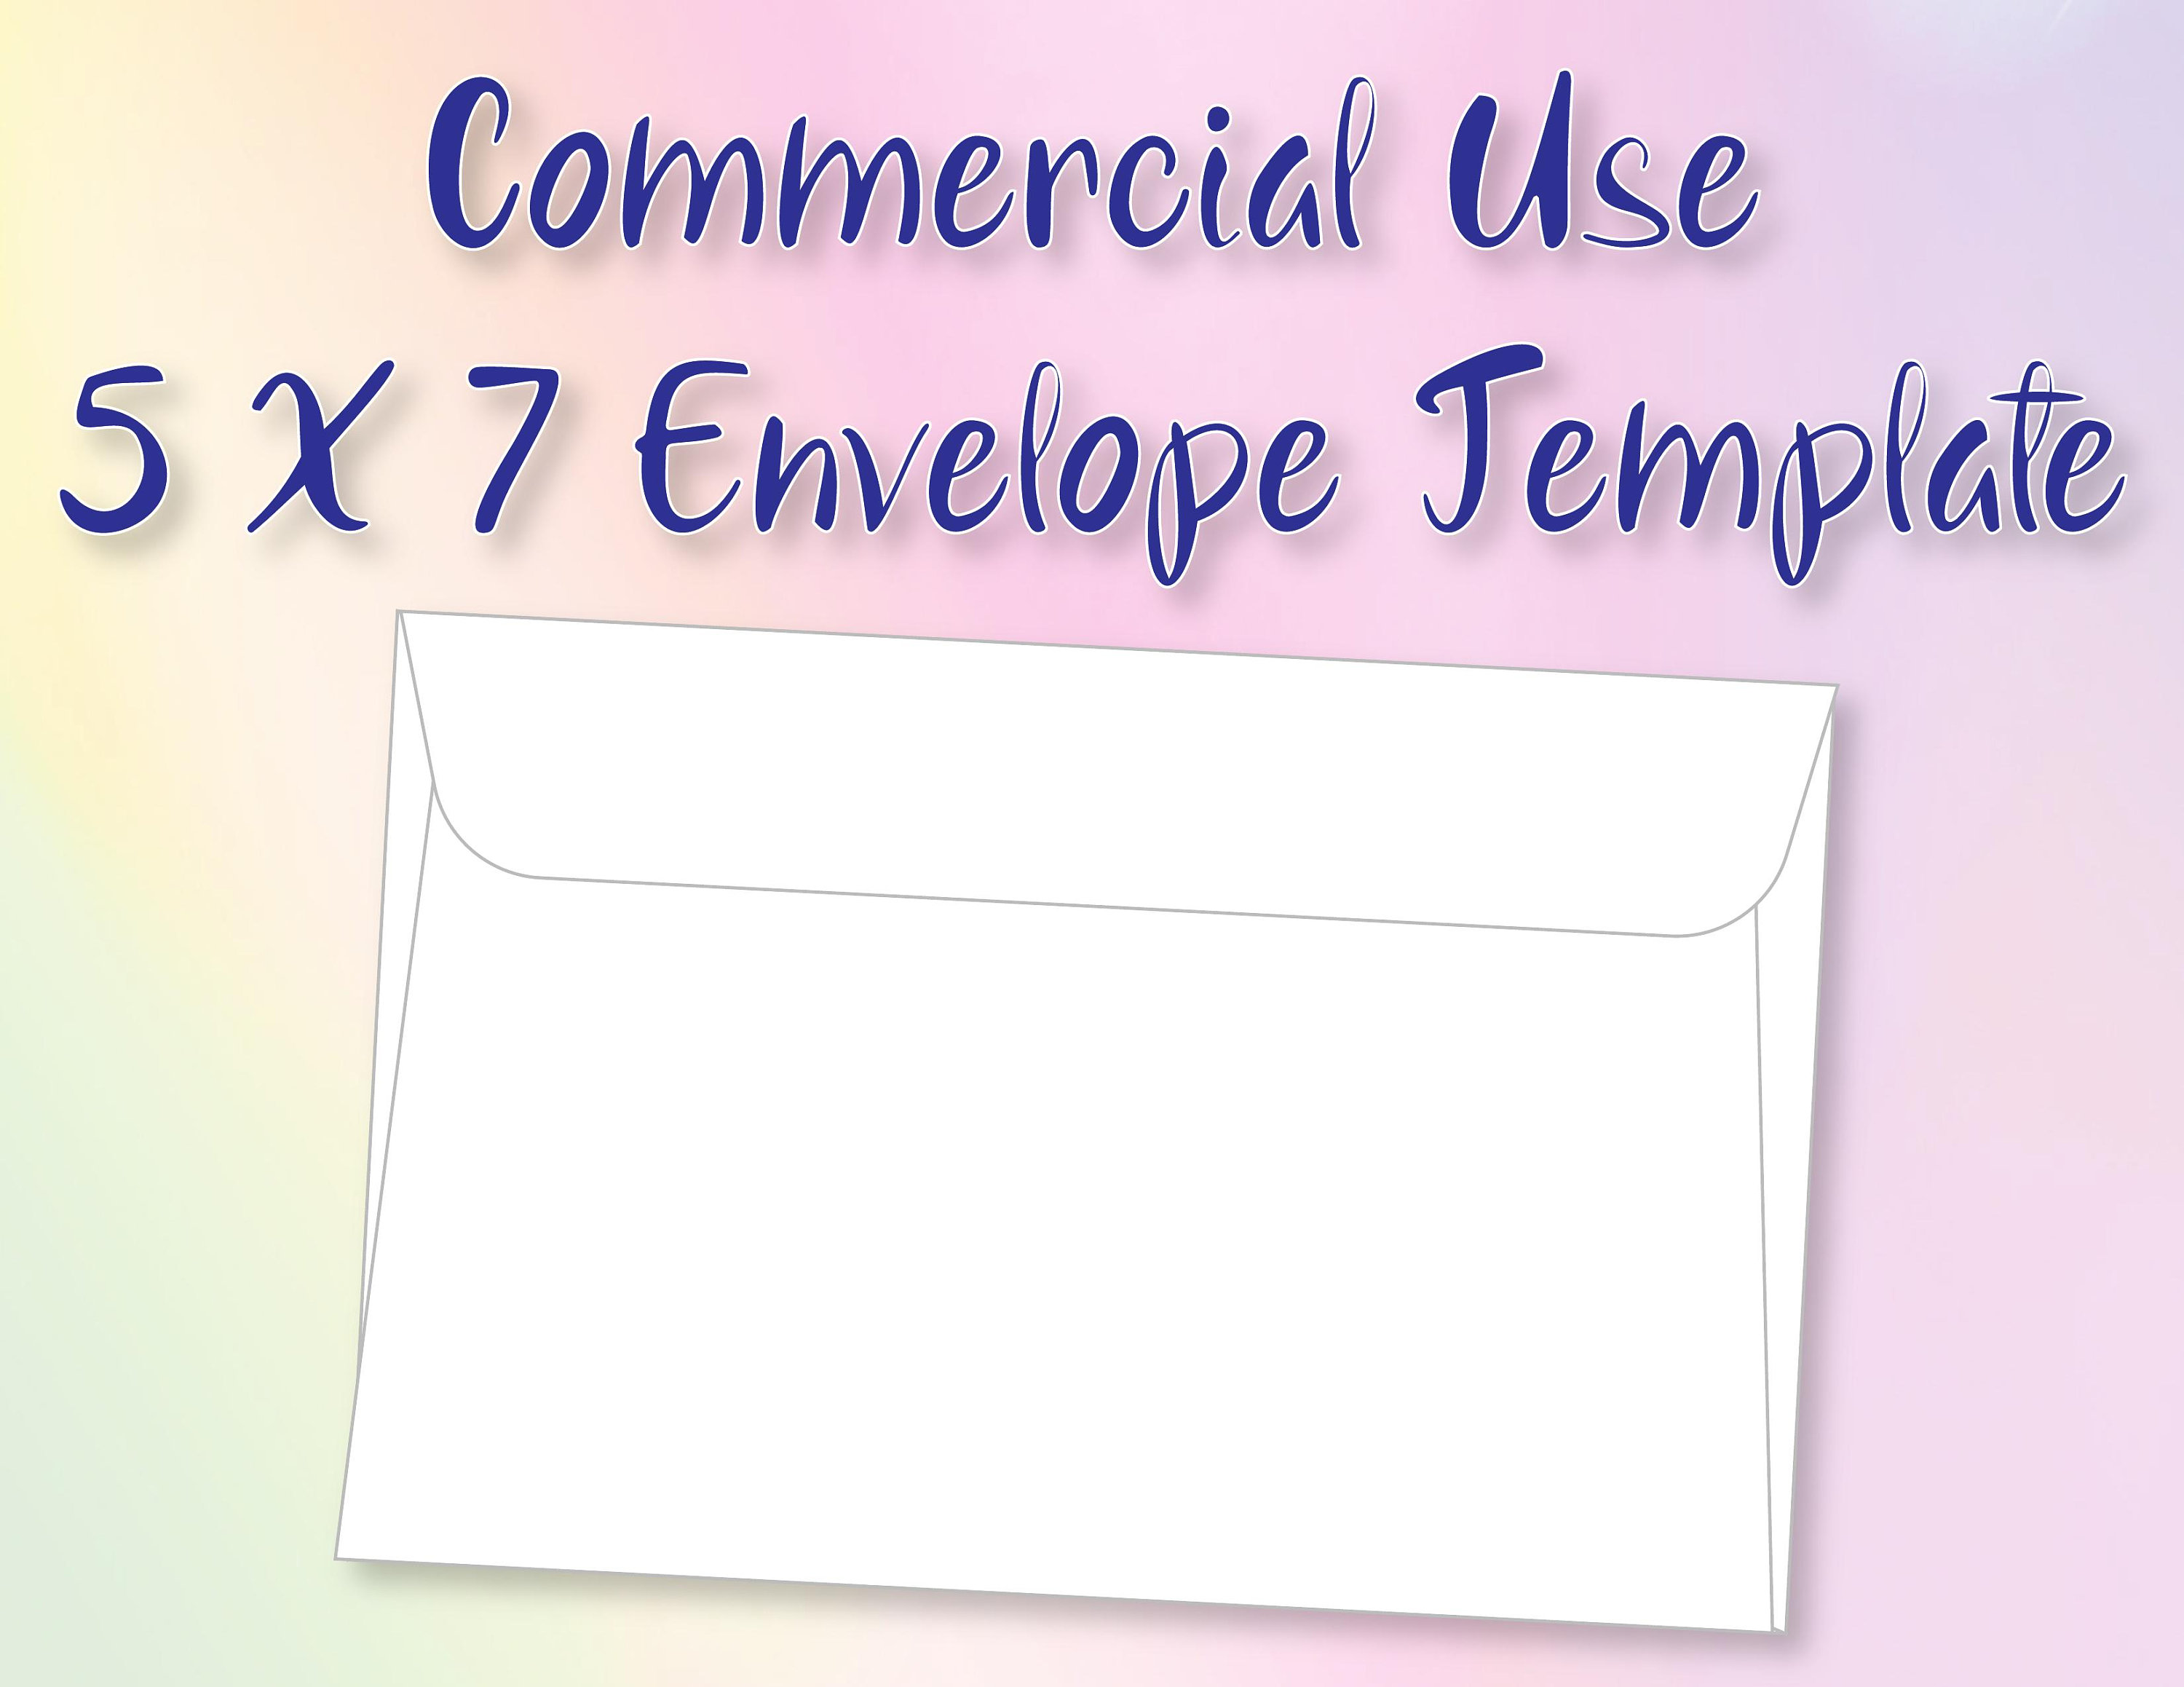 7 PACKAGES OF 5X7 PHOTO PAPER & ENVELOPES!